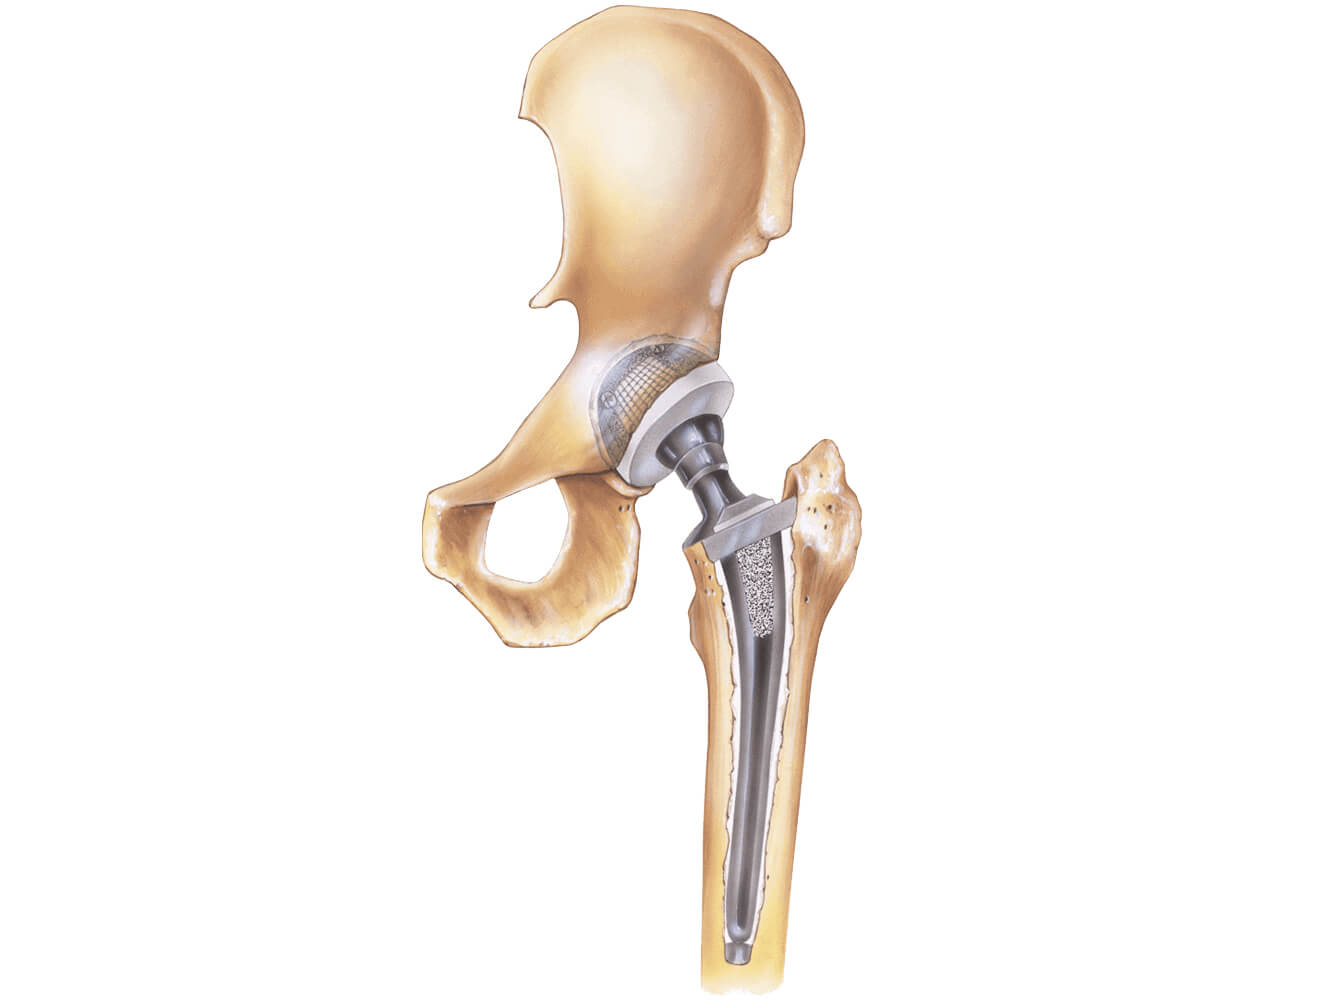 New Procedure Helps Patients Avoid Hip Replacement, Repair Joint Damage